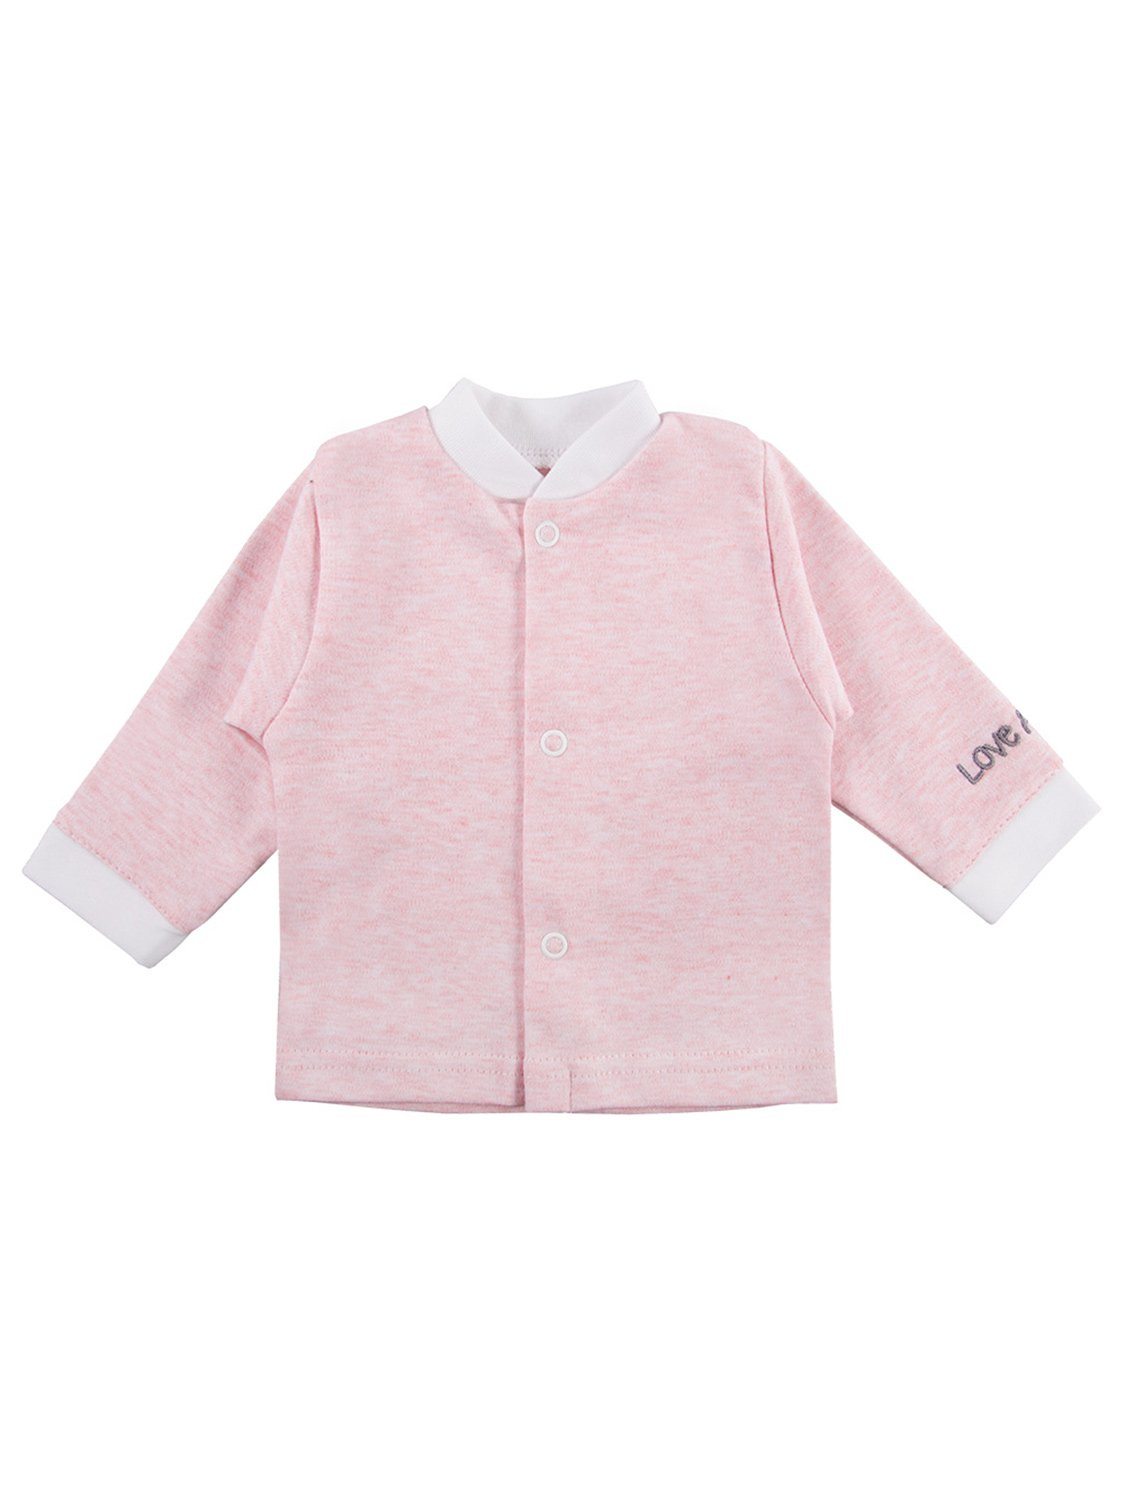 Early Baby Long Sleeved Top, "Love Alpaca" Embroidery - Pink - Top / T-shirt - EEVI